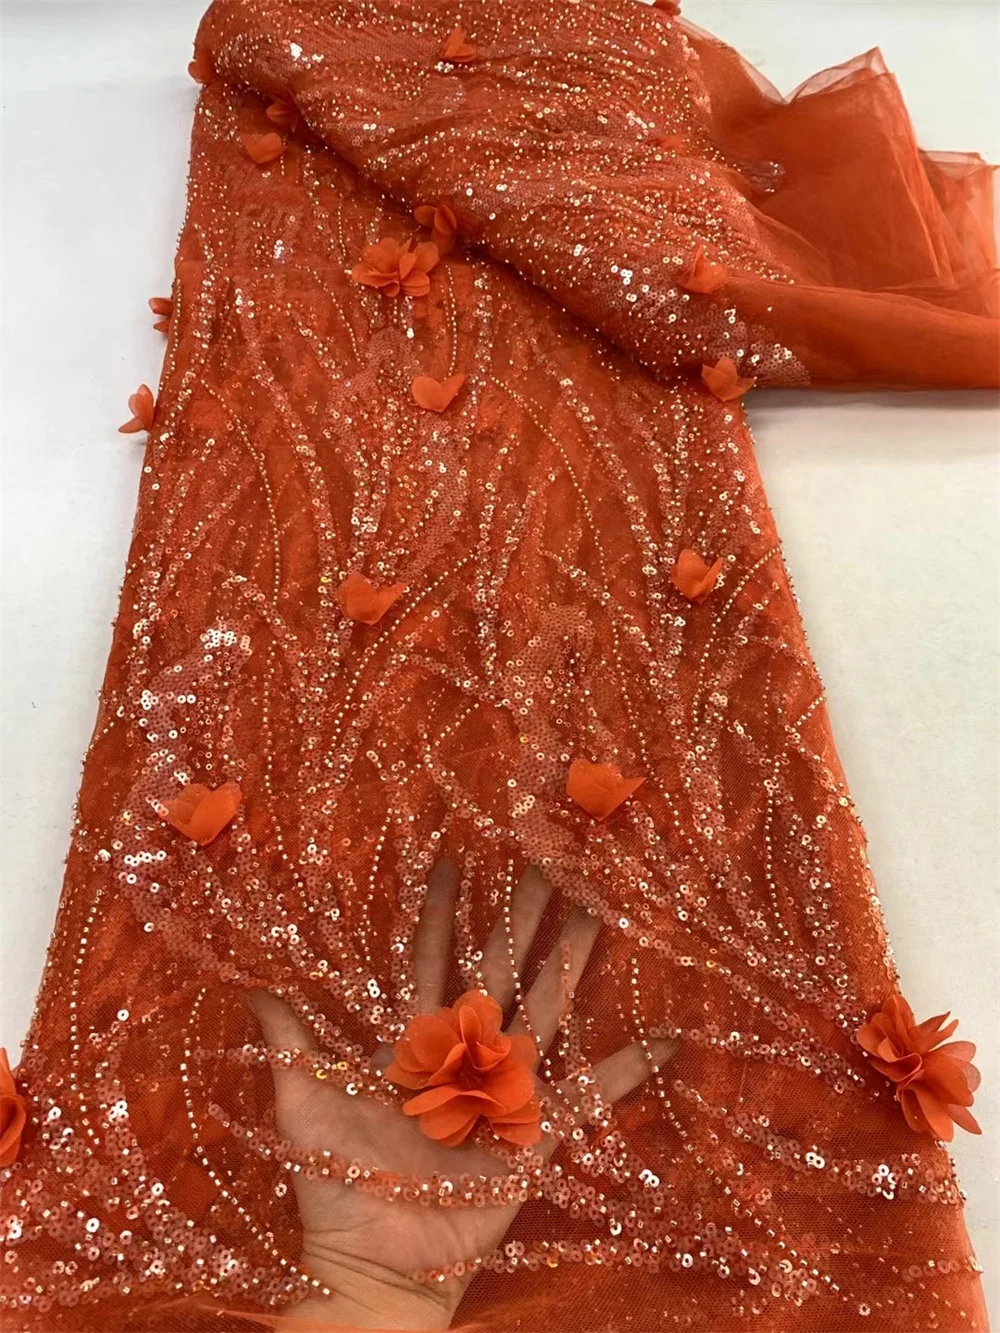 

Orange 3D Beads Lace Fabric High Quality Mesh Embroidery Applique 3D Flower Tulle Nigerian Lace Fabrics For Bridal 5Yards A239-2